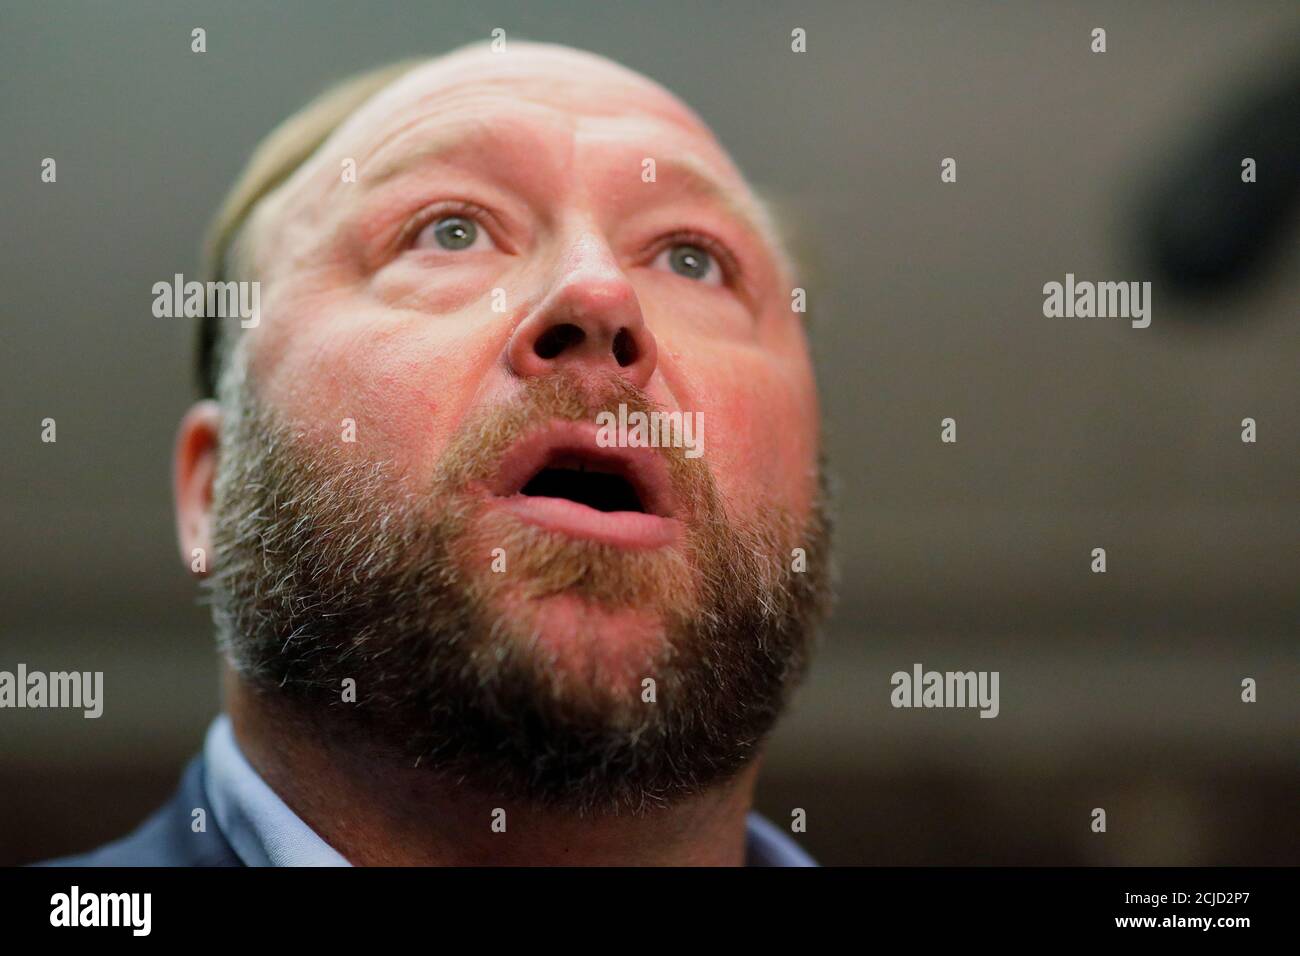 Radio host Alex Jones of Infowars talks to the news media as he arrives to listen to the testimony of Twitter CEO Jack Dorsey and Facebook COO Sheryl Sandberg at a Senate Intelligence Committee hearing on foreign influence operations on social media platforms on Capitol Hill in Washington, U.S., September 5, 2018. REUTERS/Jim Bourg Stock Photo